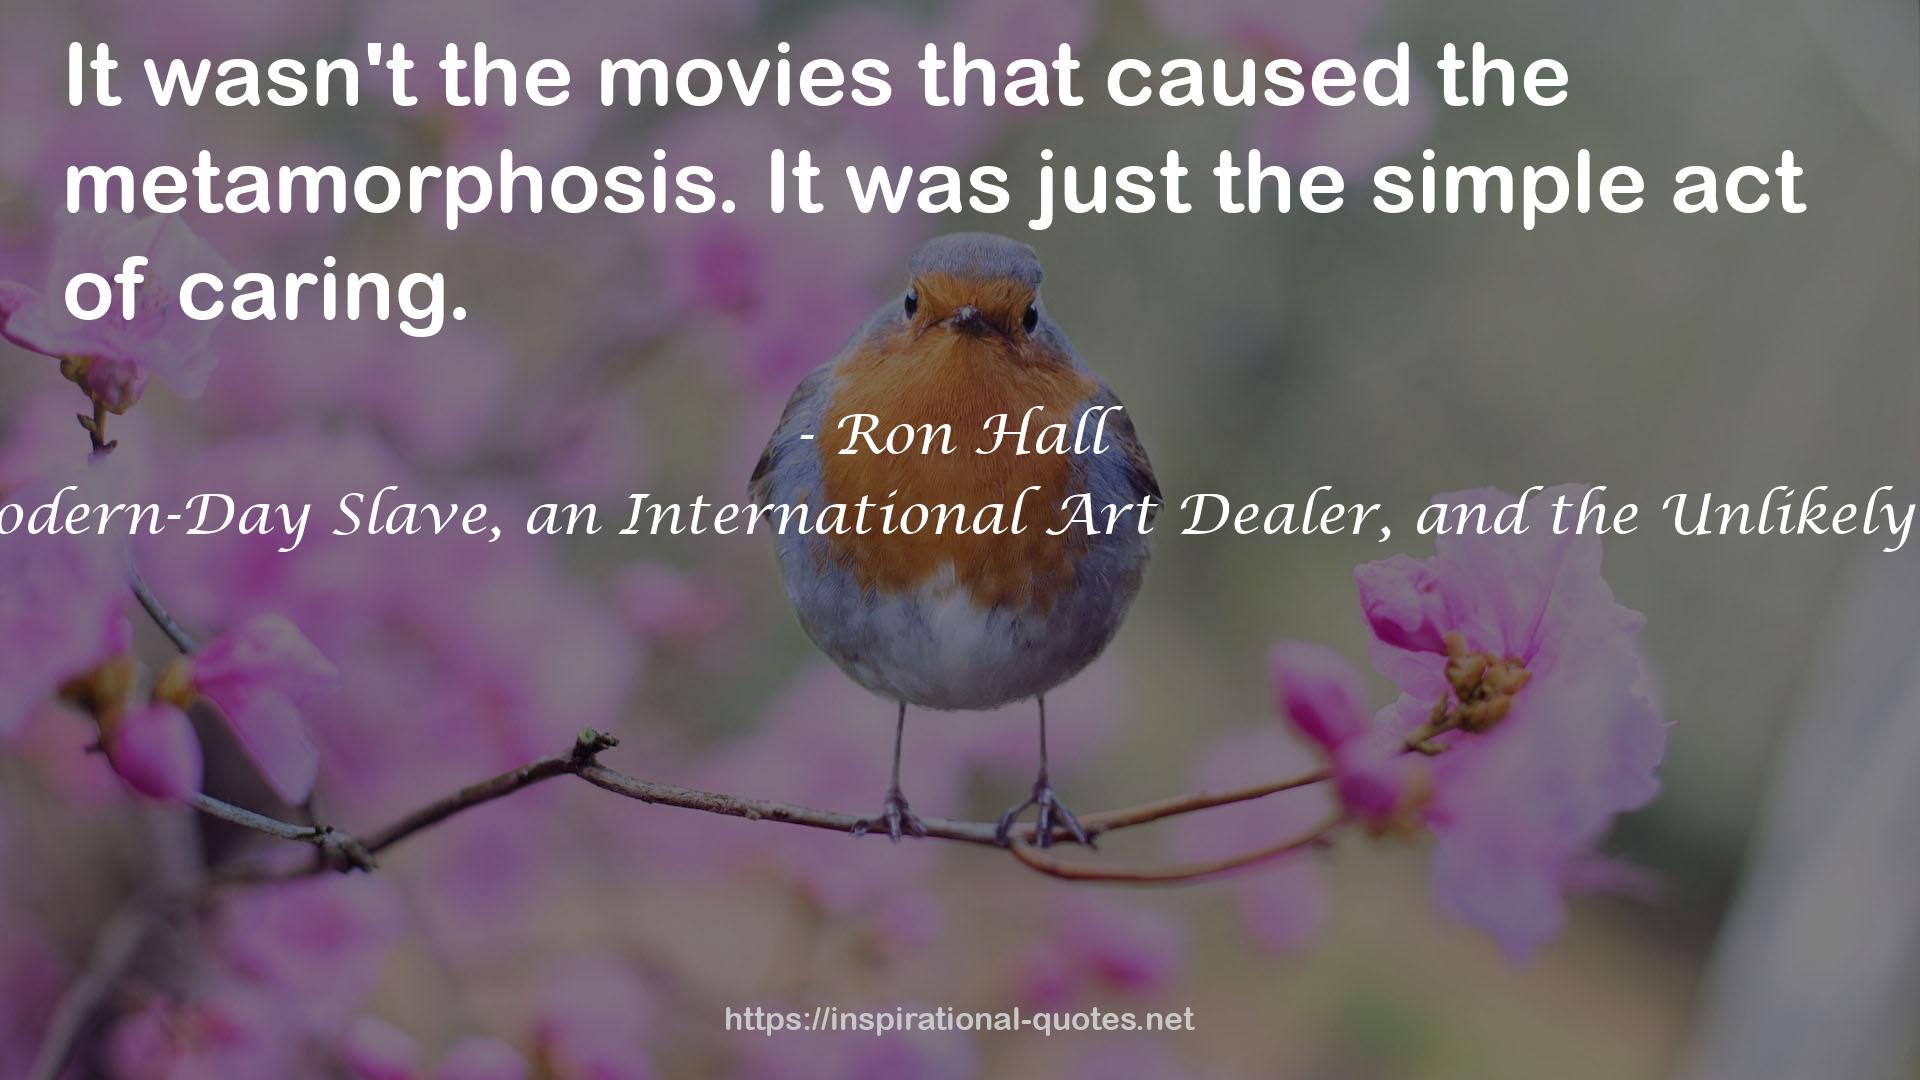 Ron Hall QUOTES